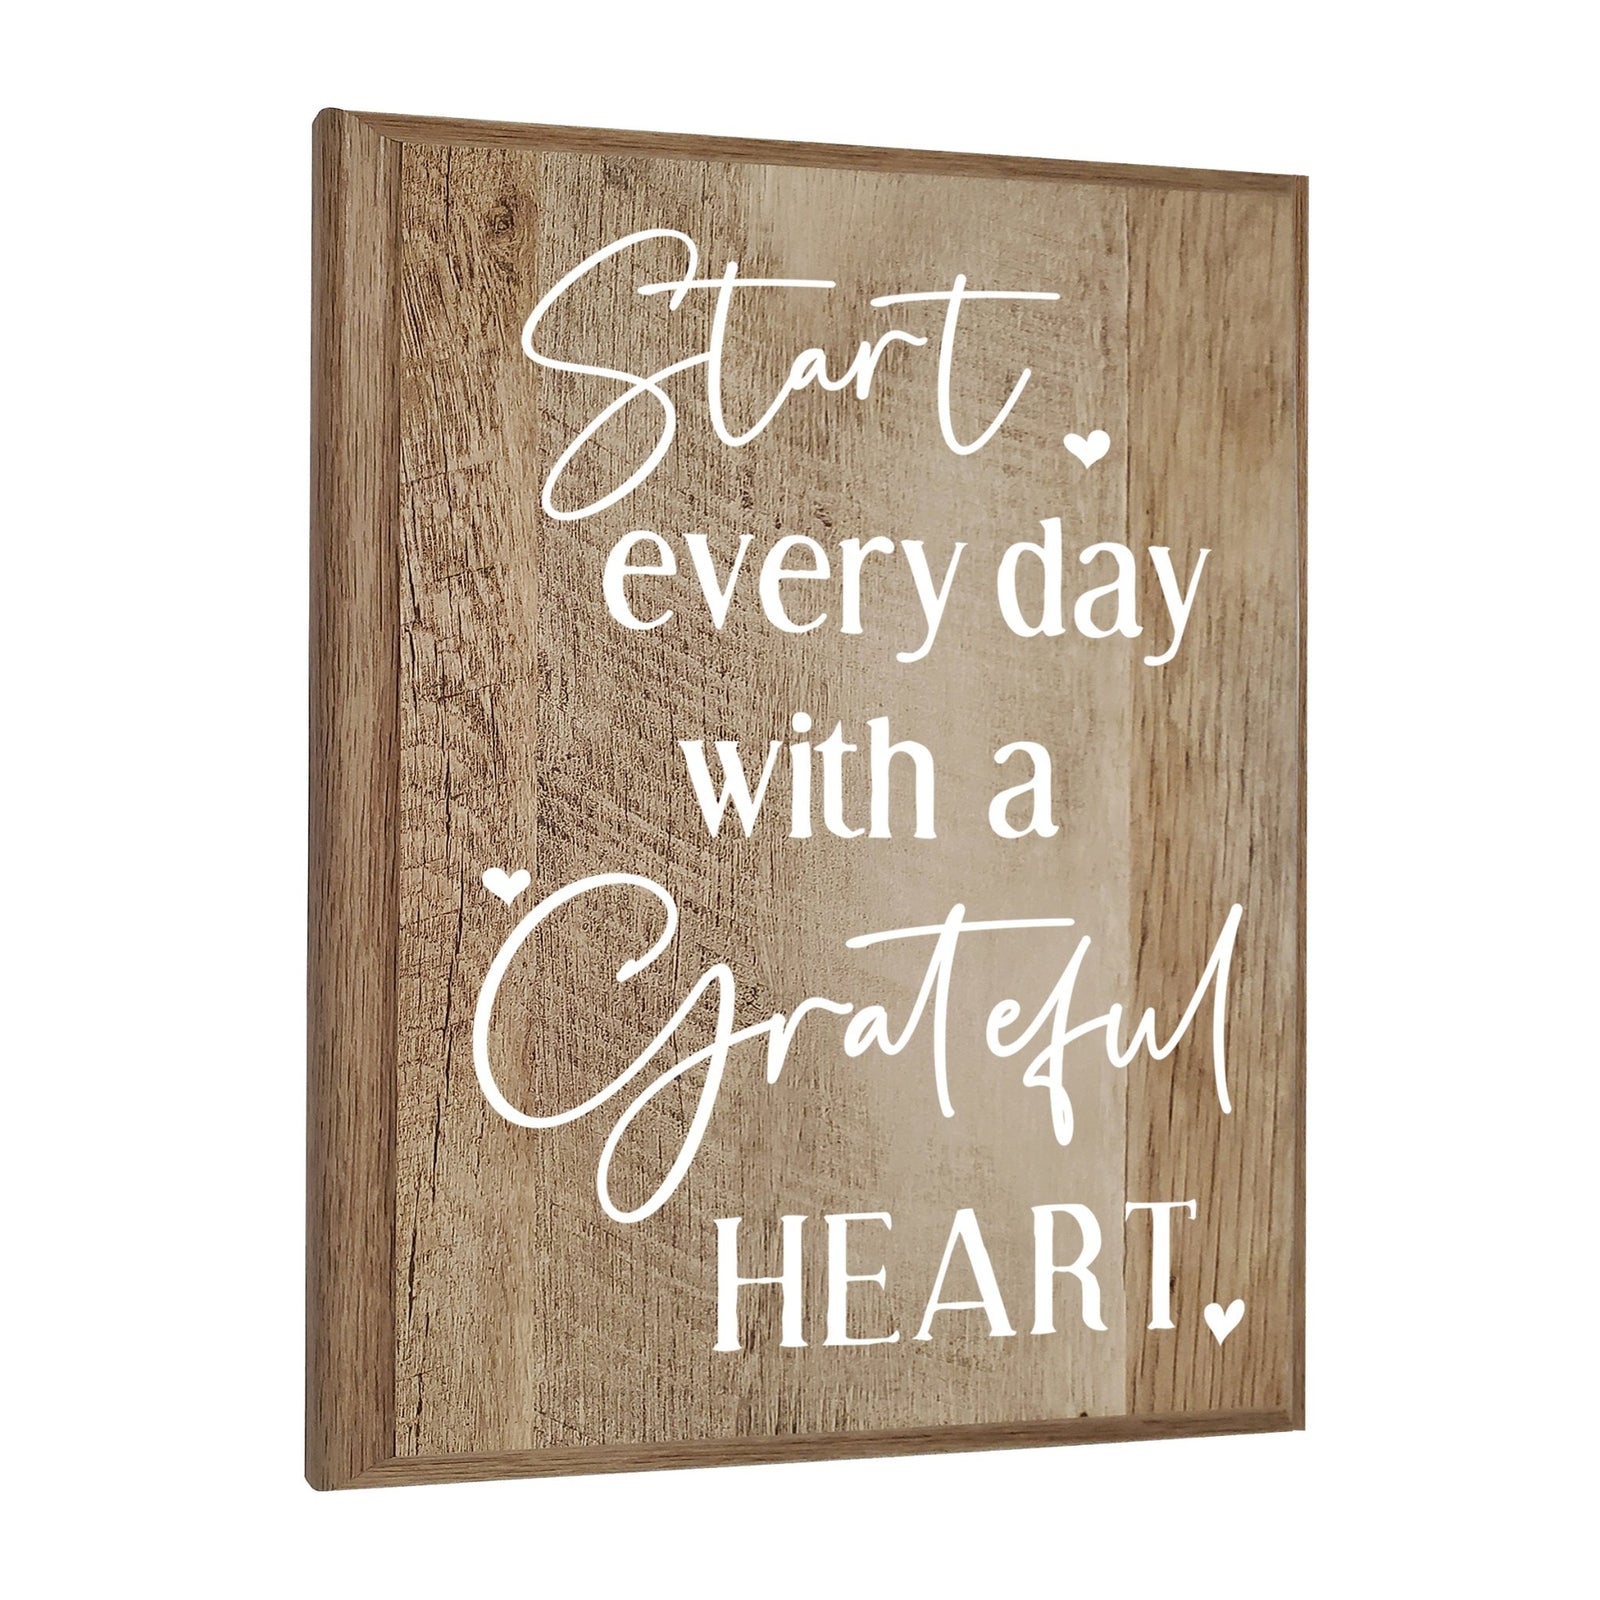 Inspirational Wood Wall Hanging Plaques With Motivational Verse For Home Décor And Gift Idea - Start every day